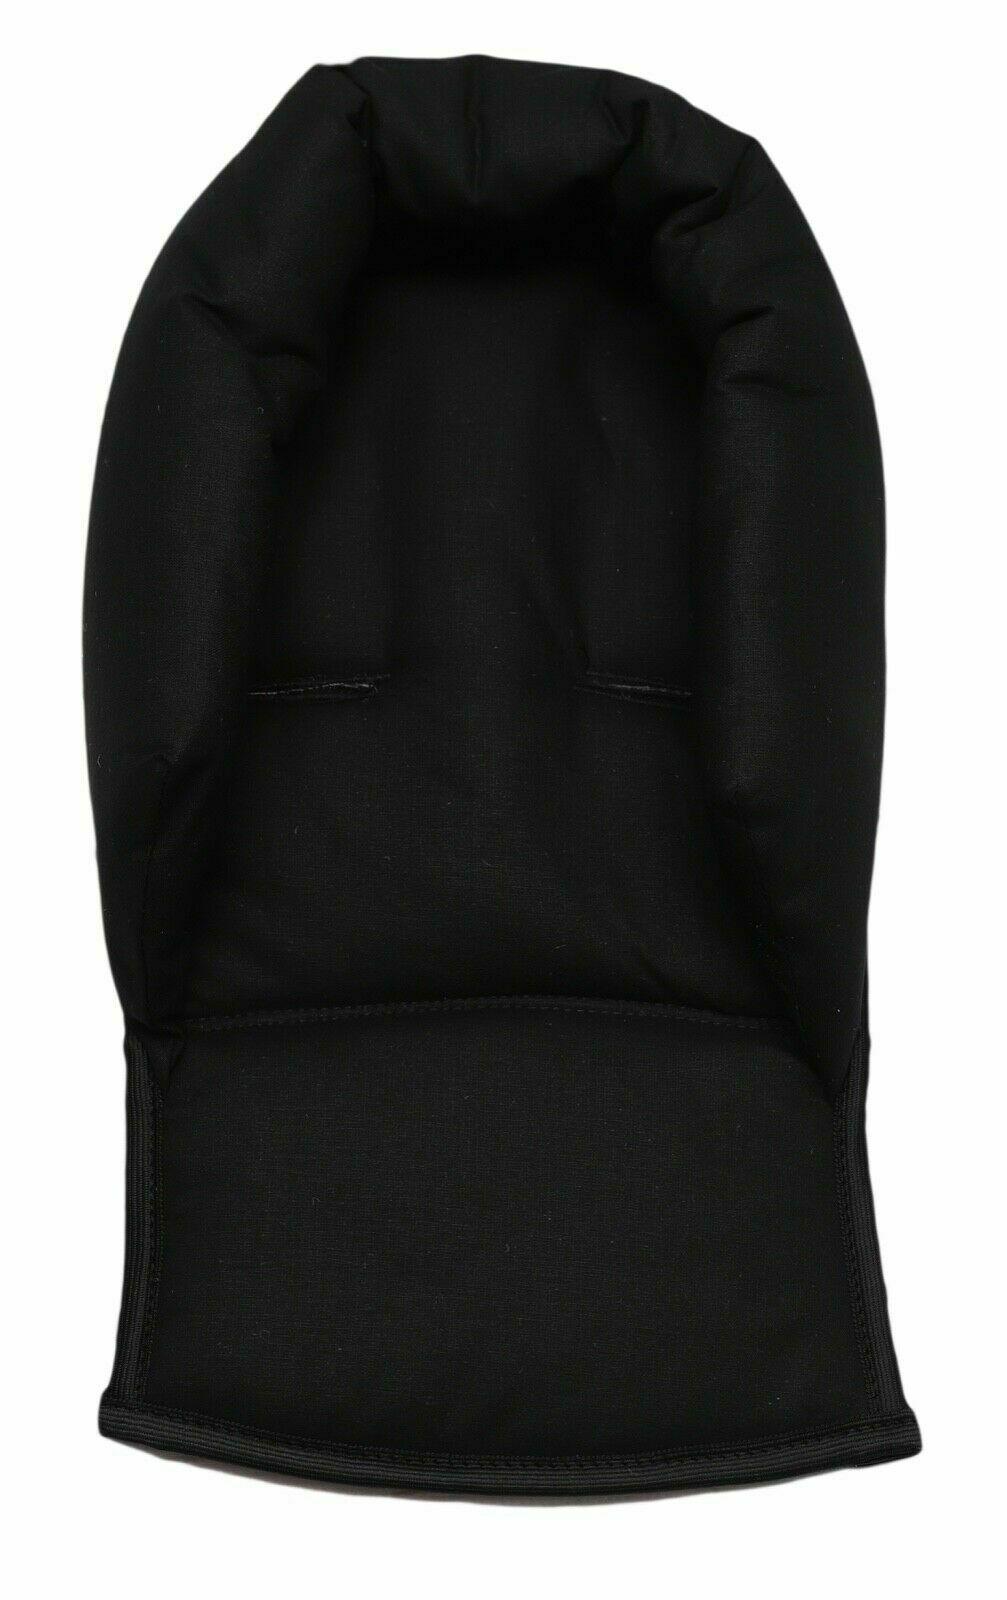 Baby Head Car Seat Rest Cushion Toddler Child Support Pillow Black